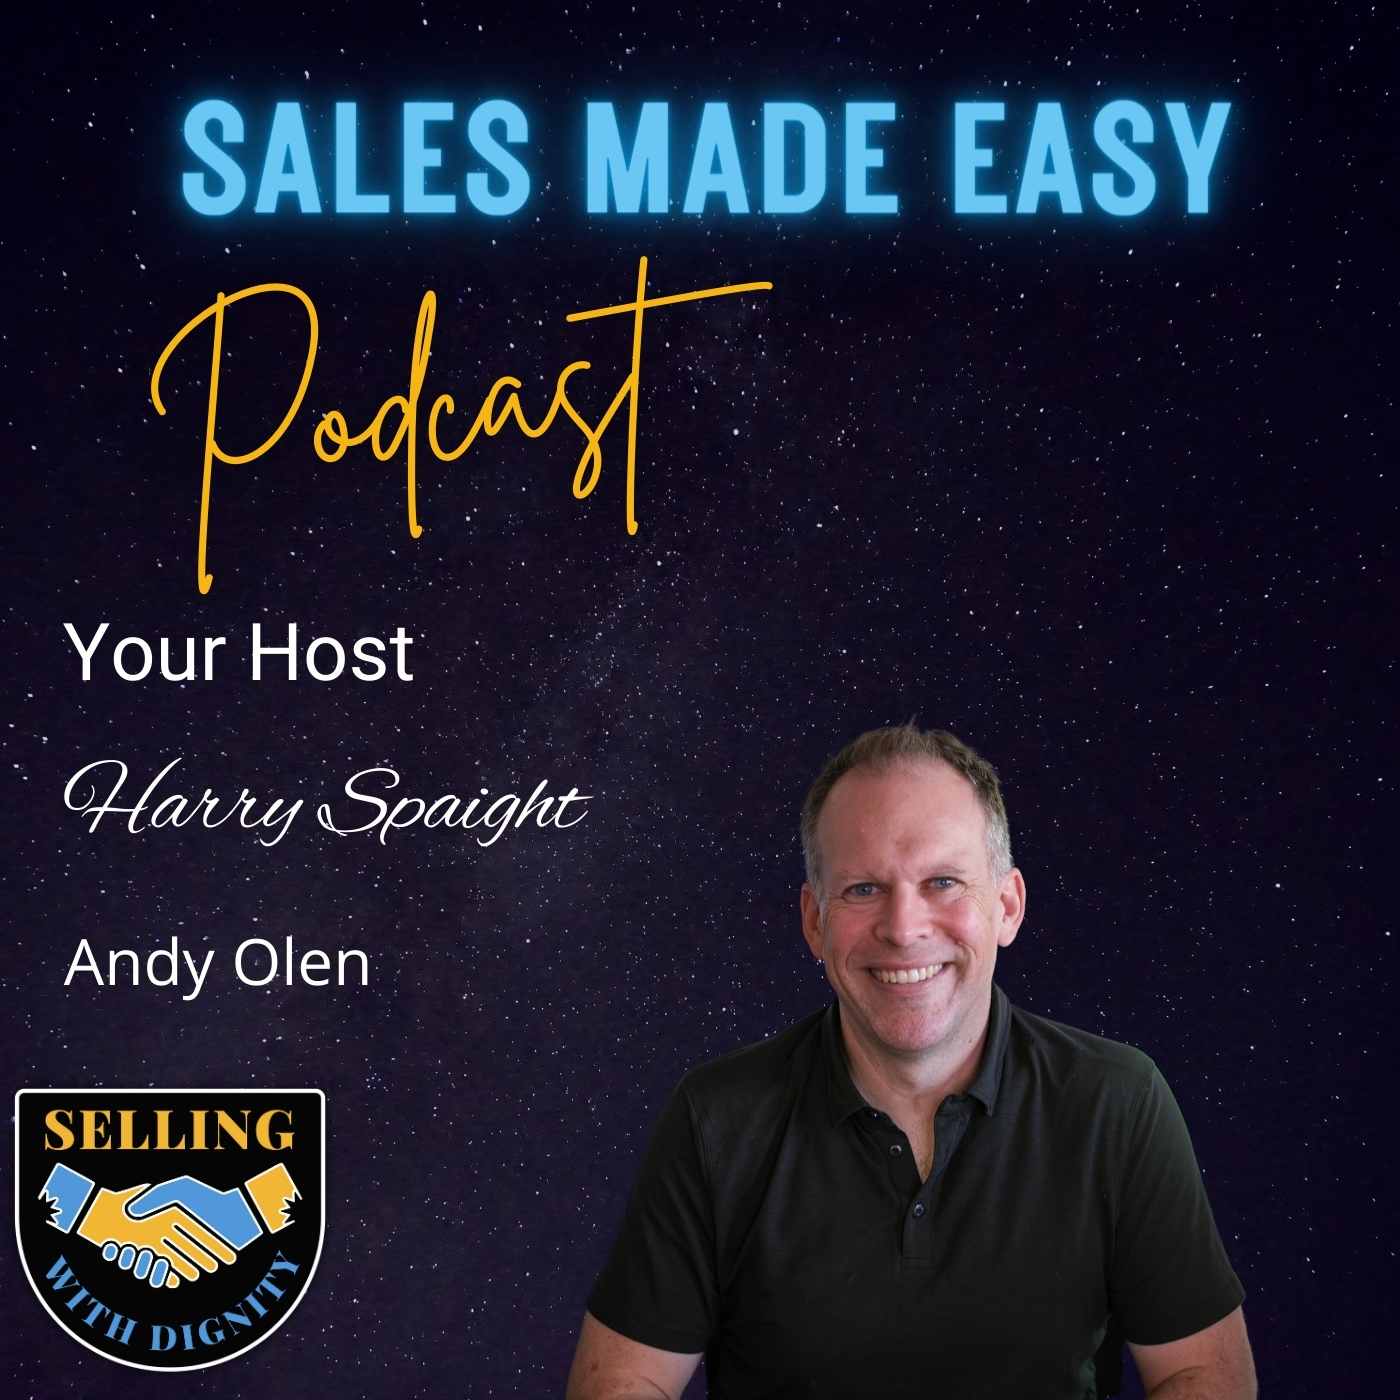 Moving The Sale Forward With Trilogy of Yes Author, Andy Olen